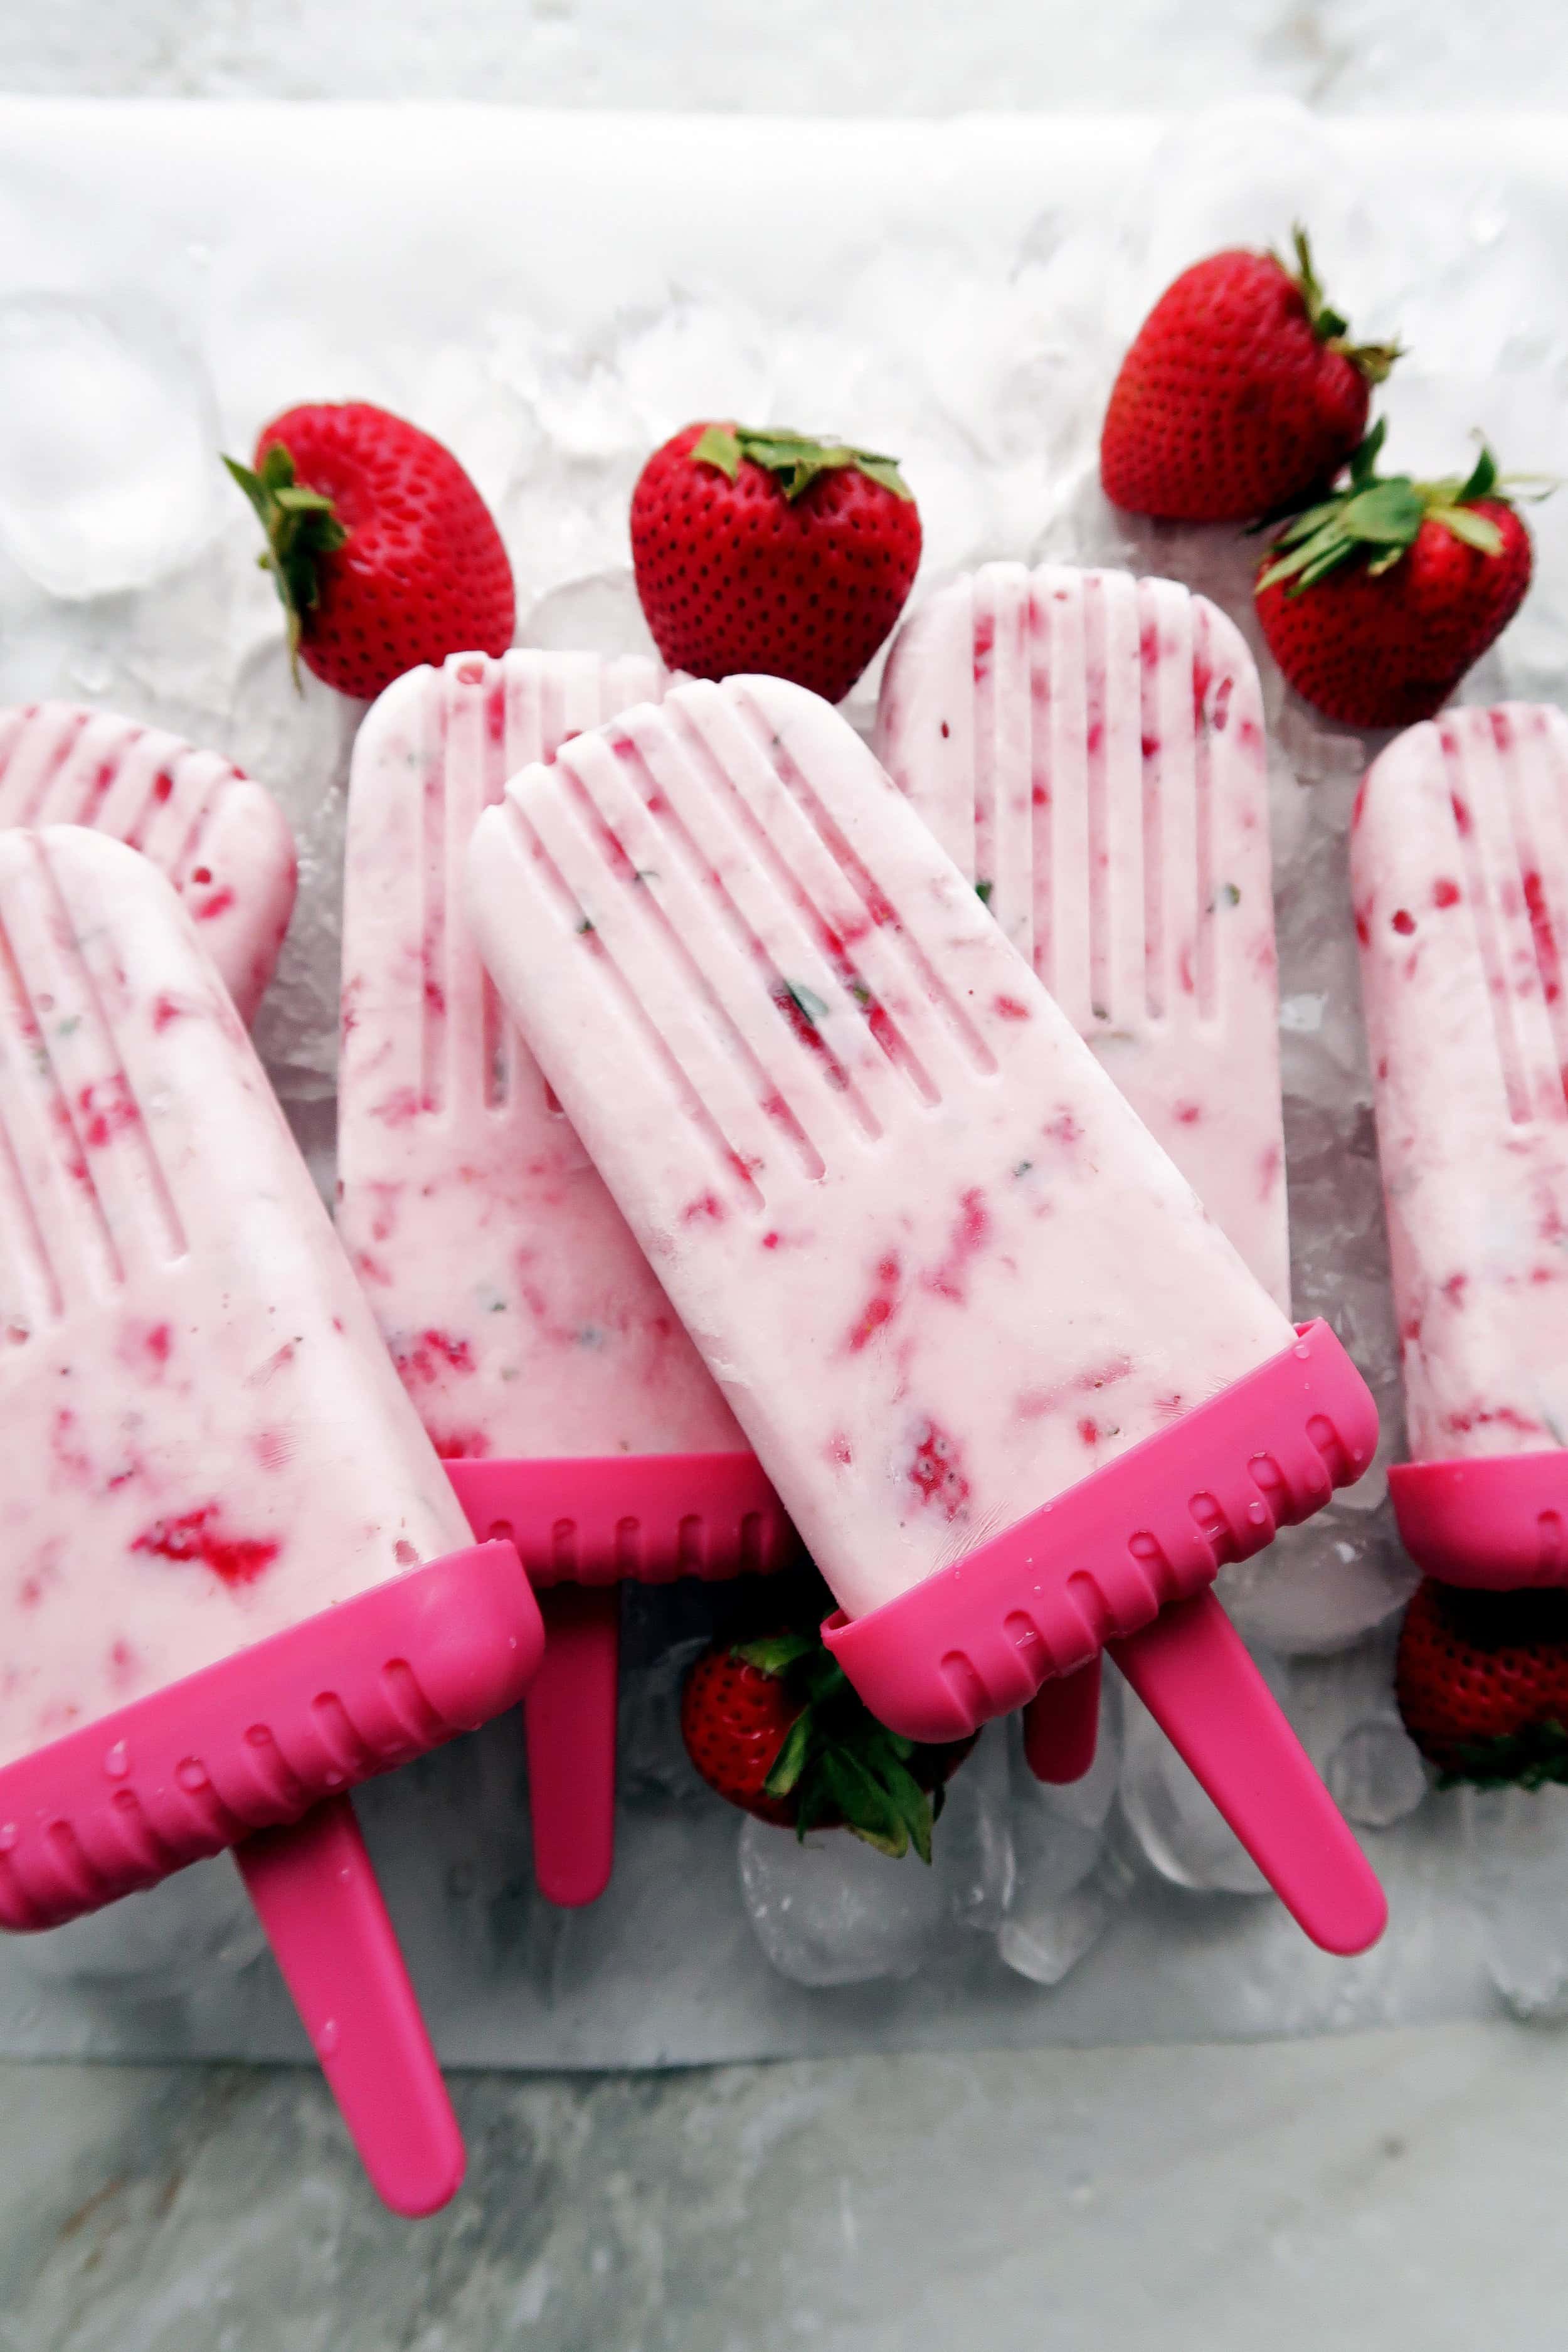 Six Fresh Strawberry Mint Yogurt Popsicles placed on top of one another on a bed of ice with strawberries around it.